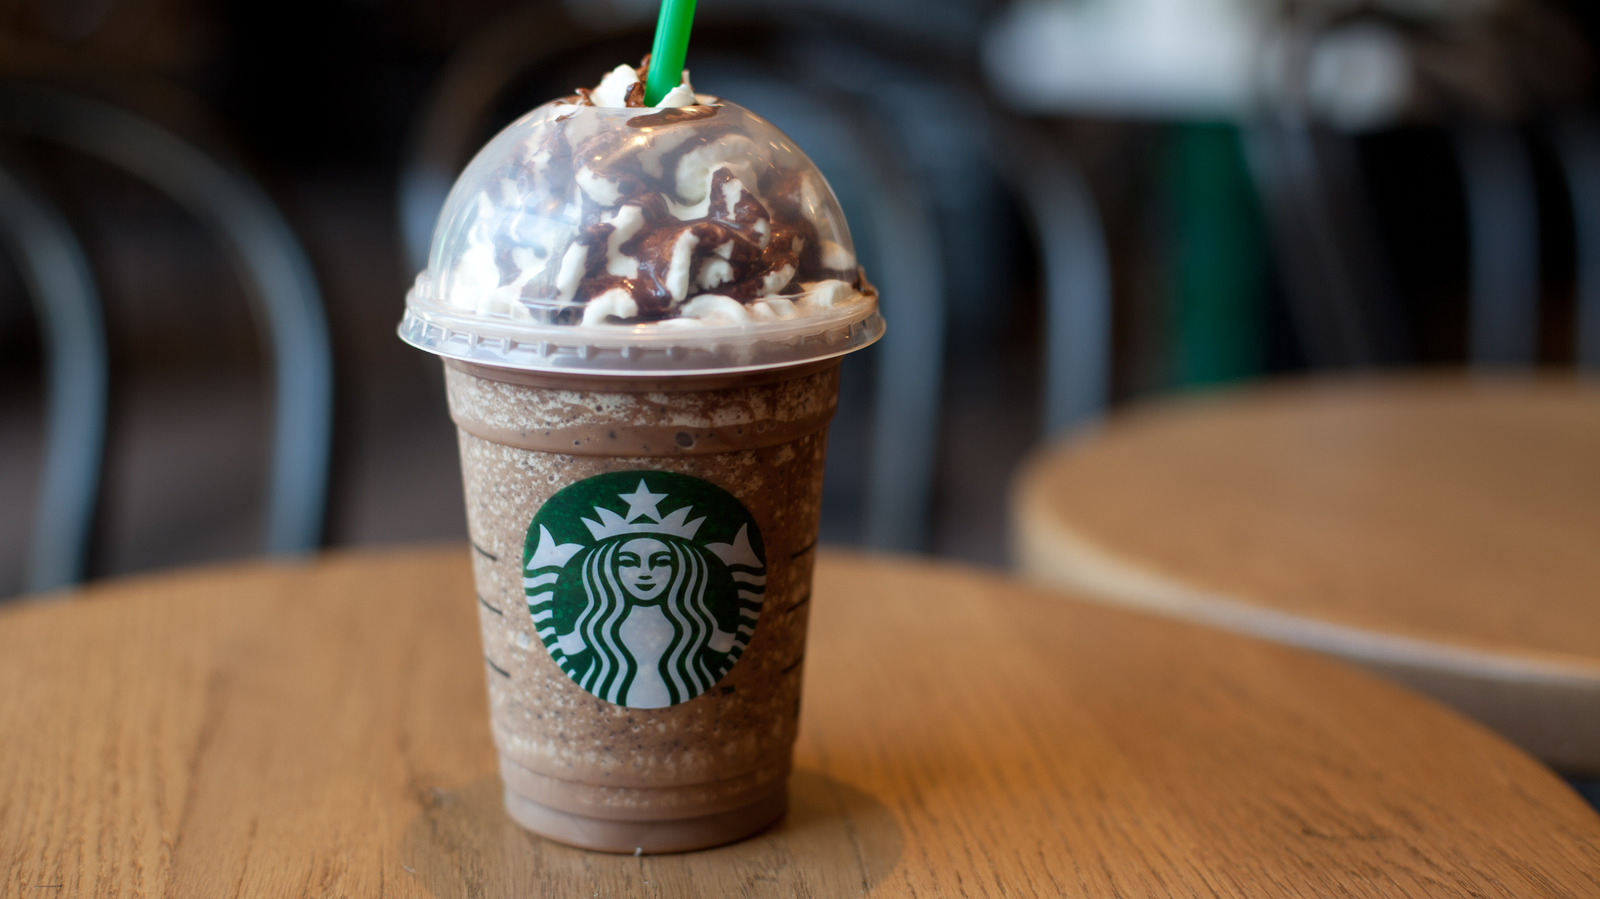 https://www.tastingtable.com/img/gallery/if-your-starbucks-frappuccino-order-takes-too-long-blame-the-dome-lid/l-intro-1695752140.jpg